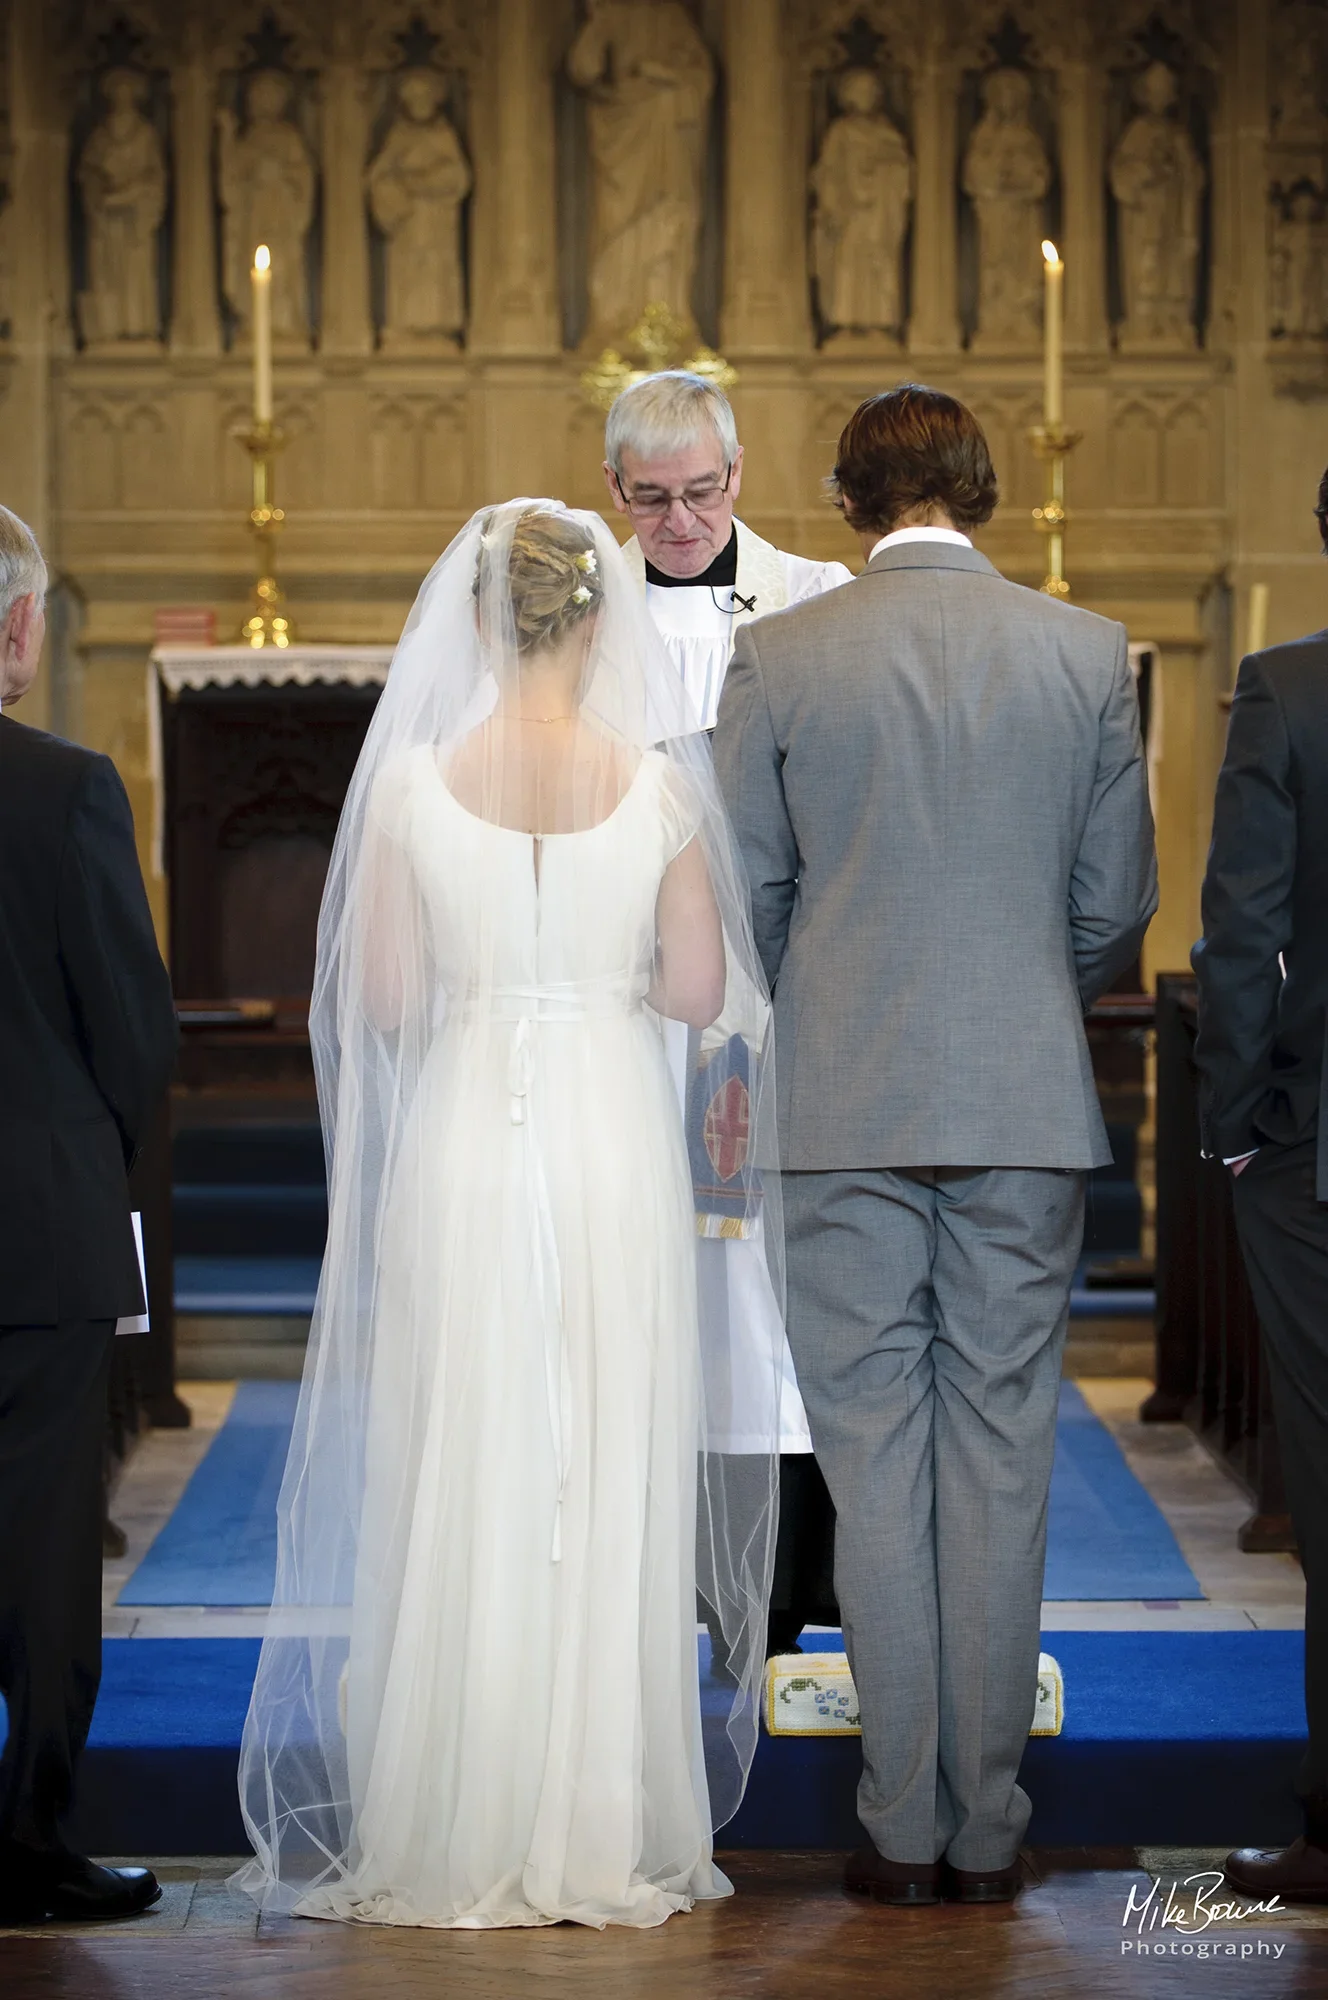 wedding couple with heads bowed before the vicar during the wedding service